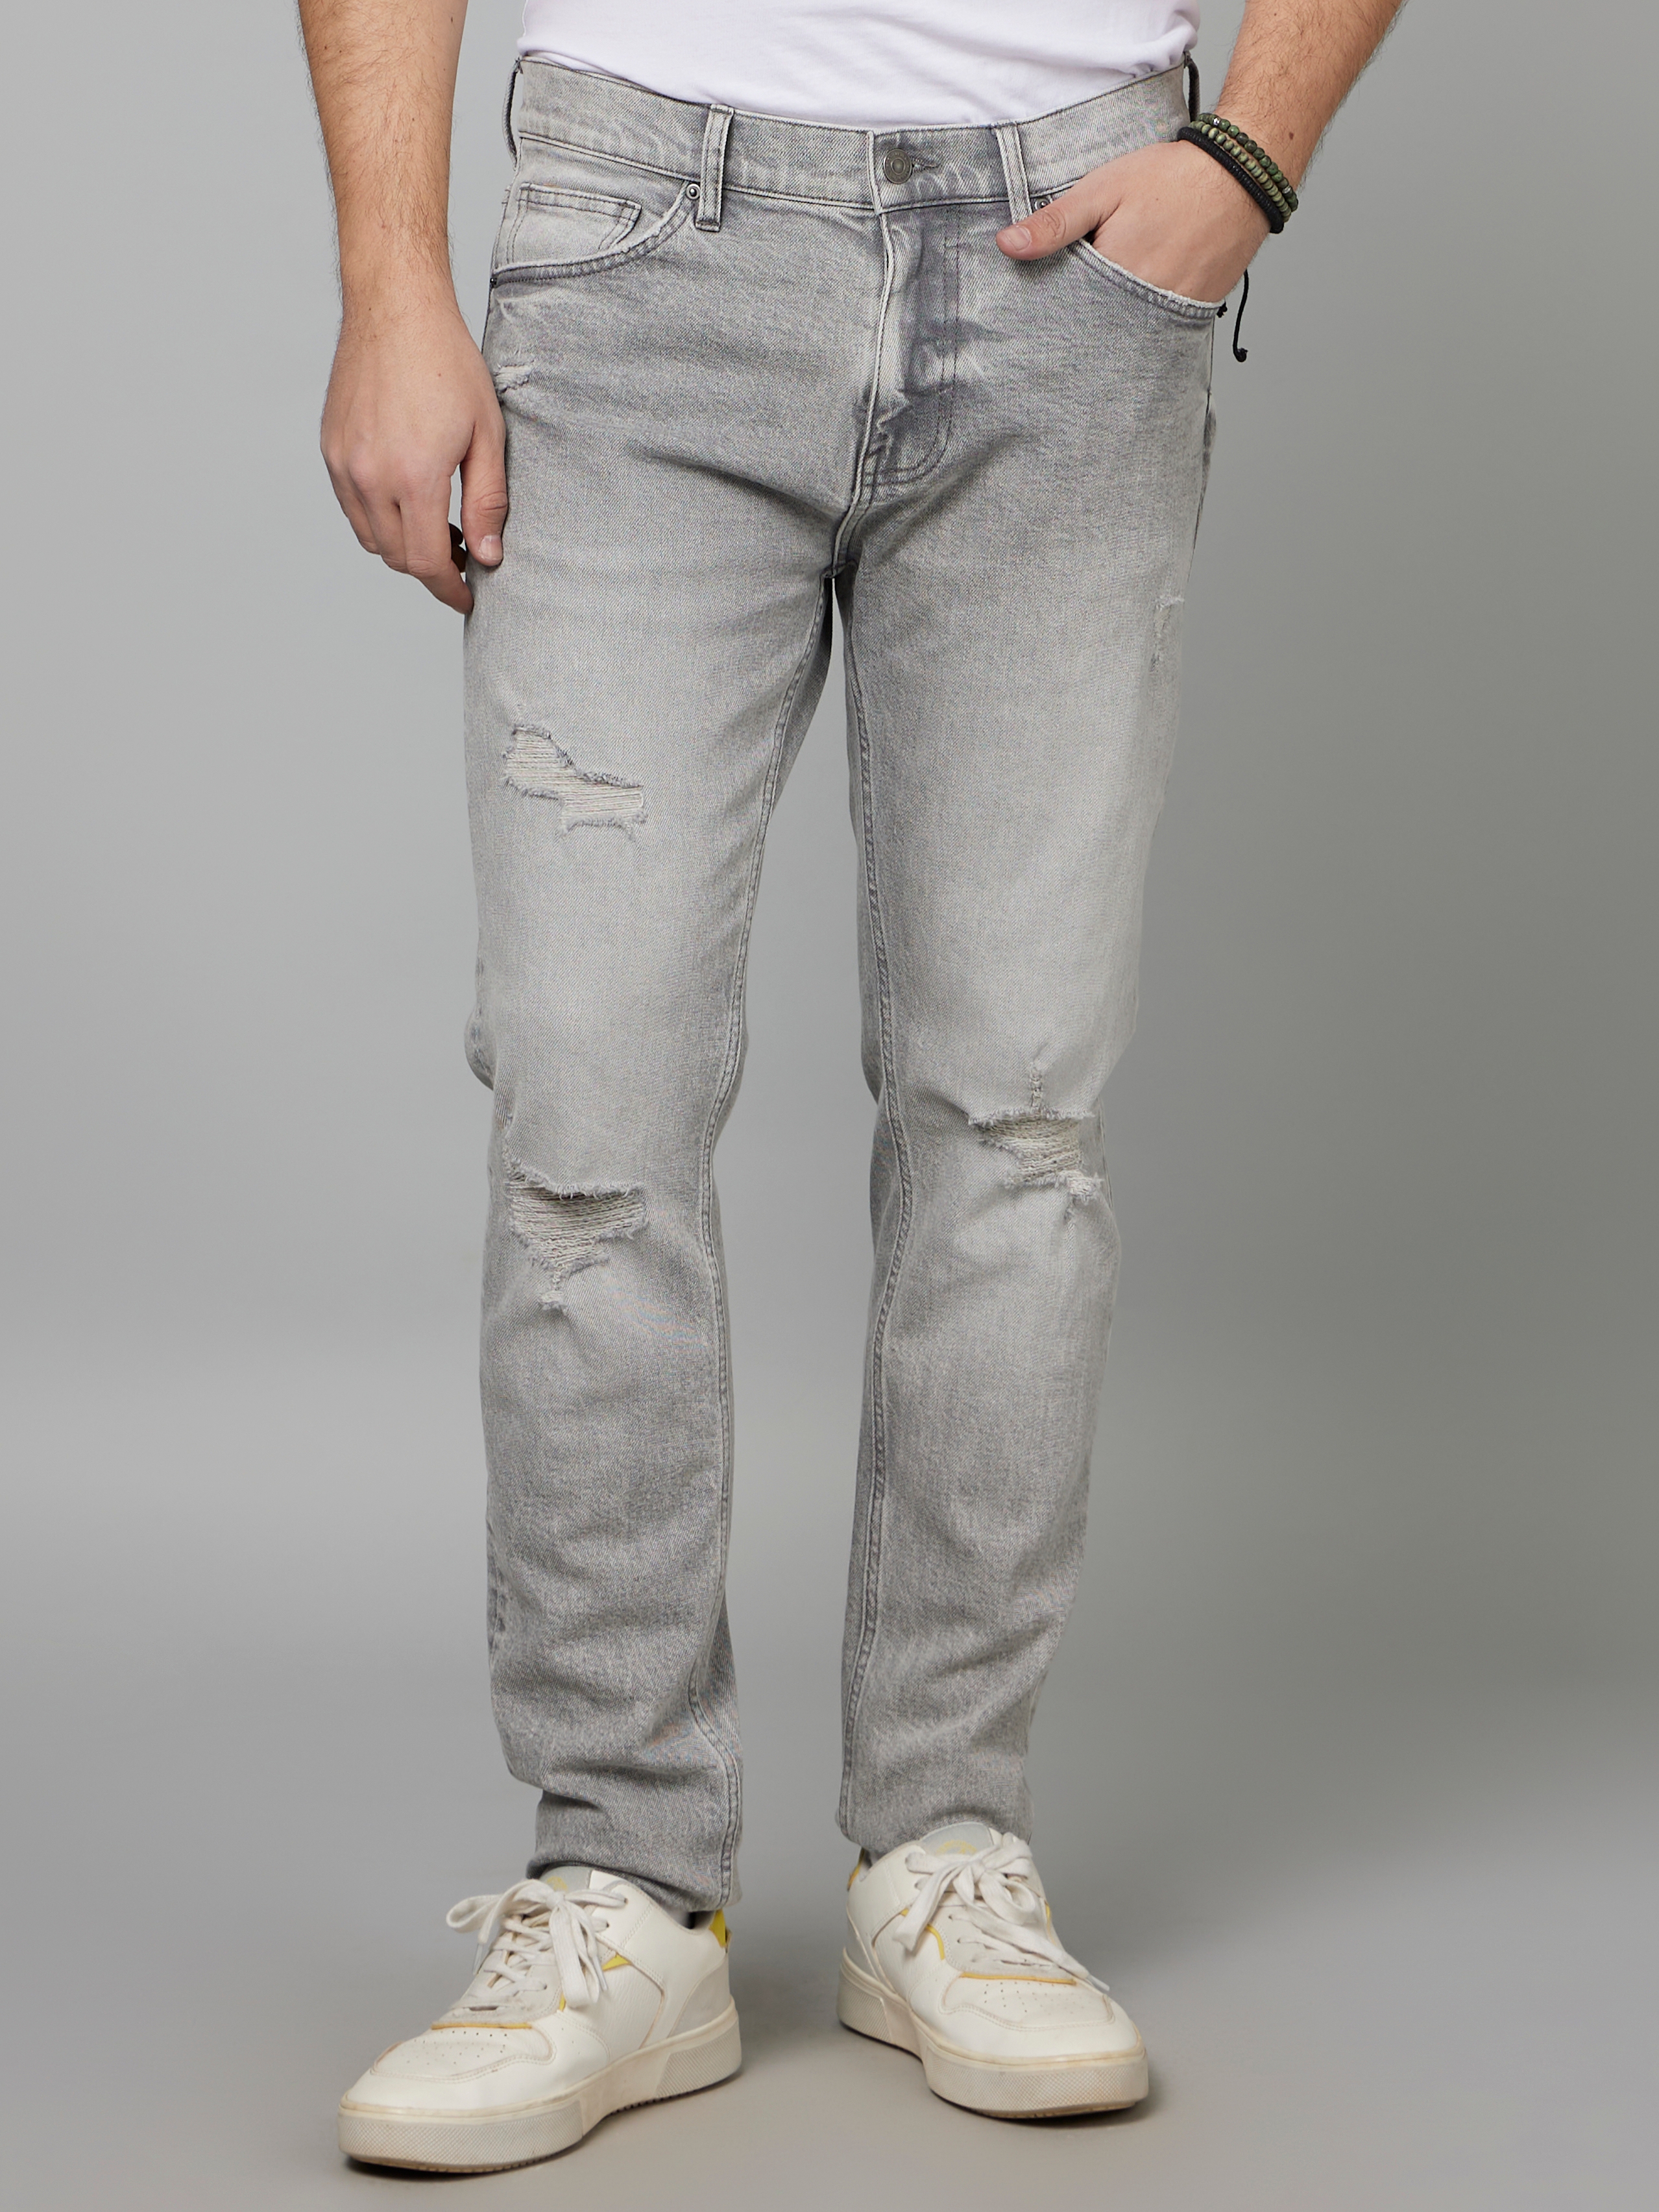 Men's Grey Cotton Blend Solid Ripped Jeans